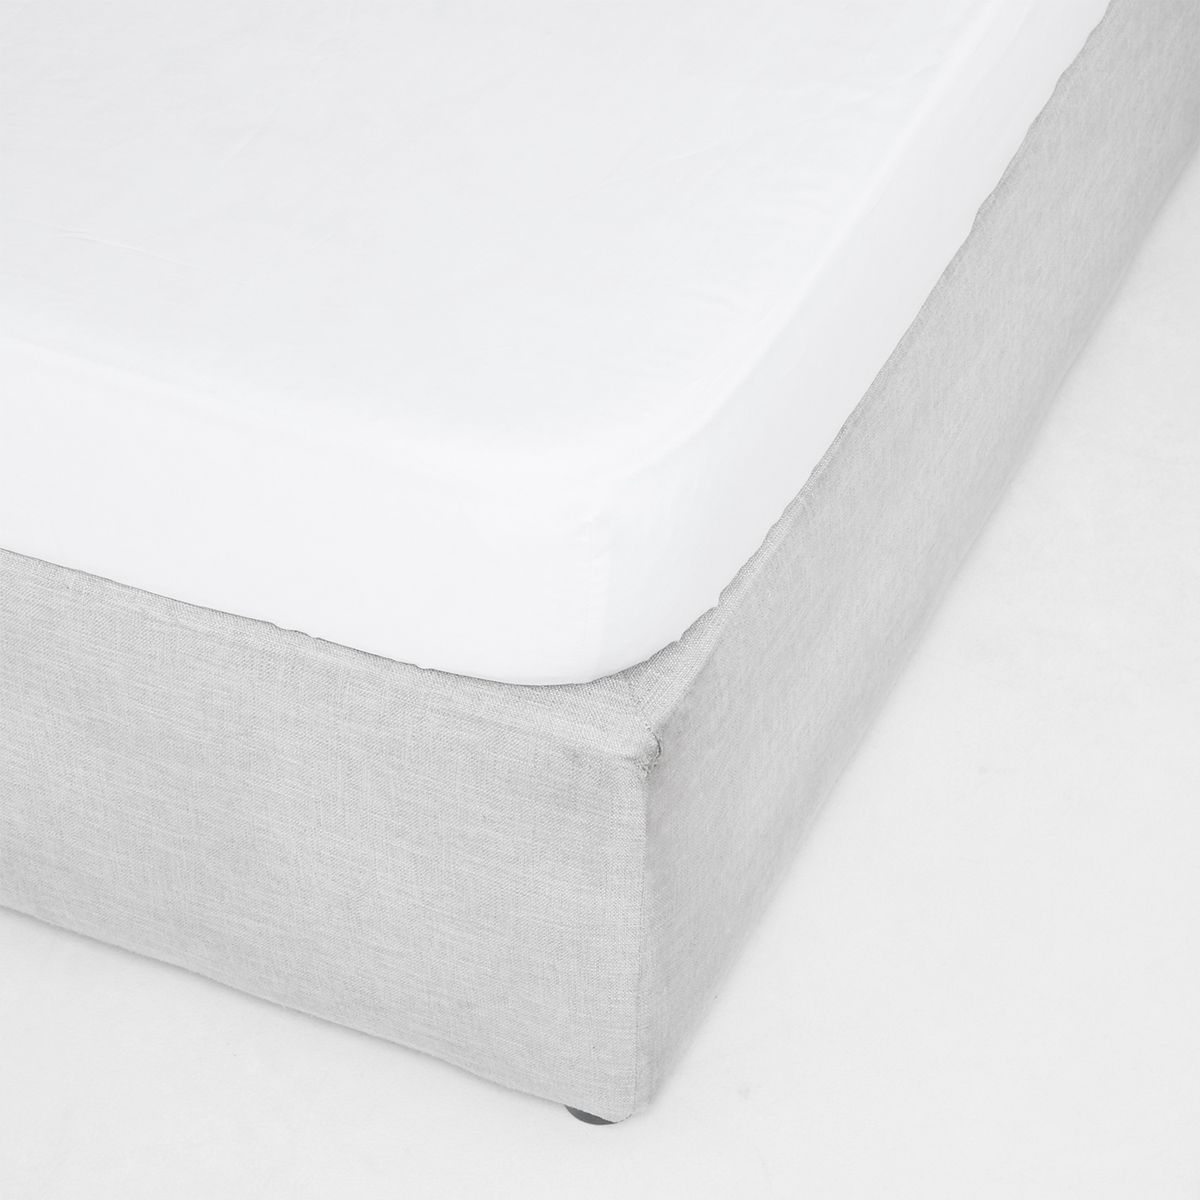 George & Mason - T400 Fitted Sheet | Shop Today. Get it Tomorrow ...